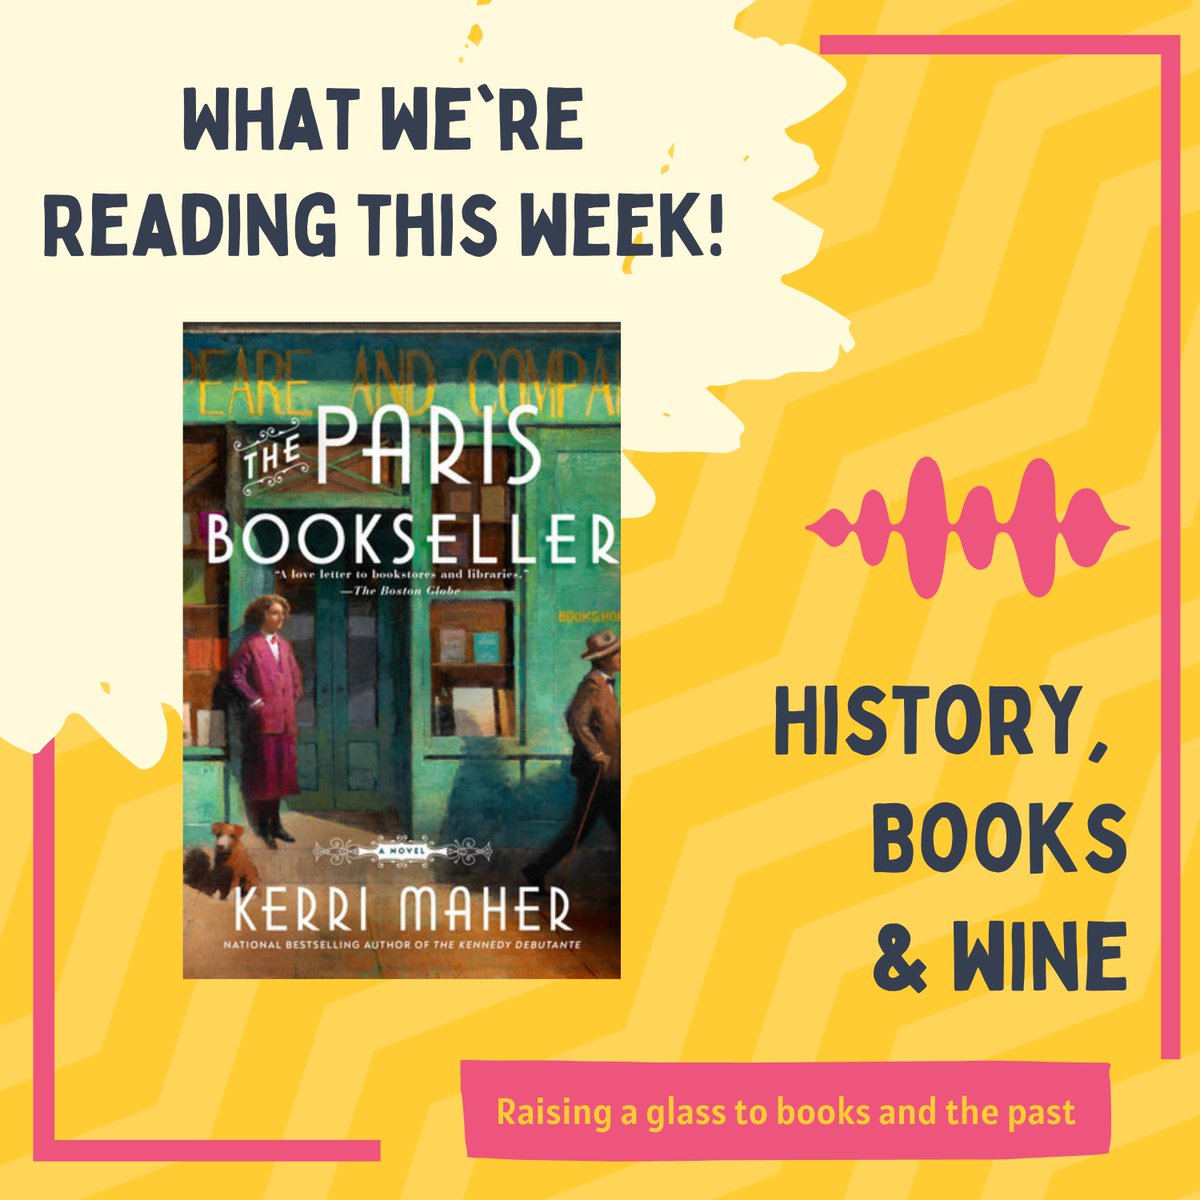 This week on the podcast, we're reading @kerrimaherbooks The Paris Bookseller! Grab your copy! amzn.to/3GGDJTG

#historicalfiction #BookRecommendations #books #sylviabeach #bookshop #paris